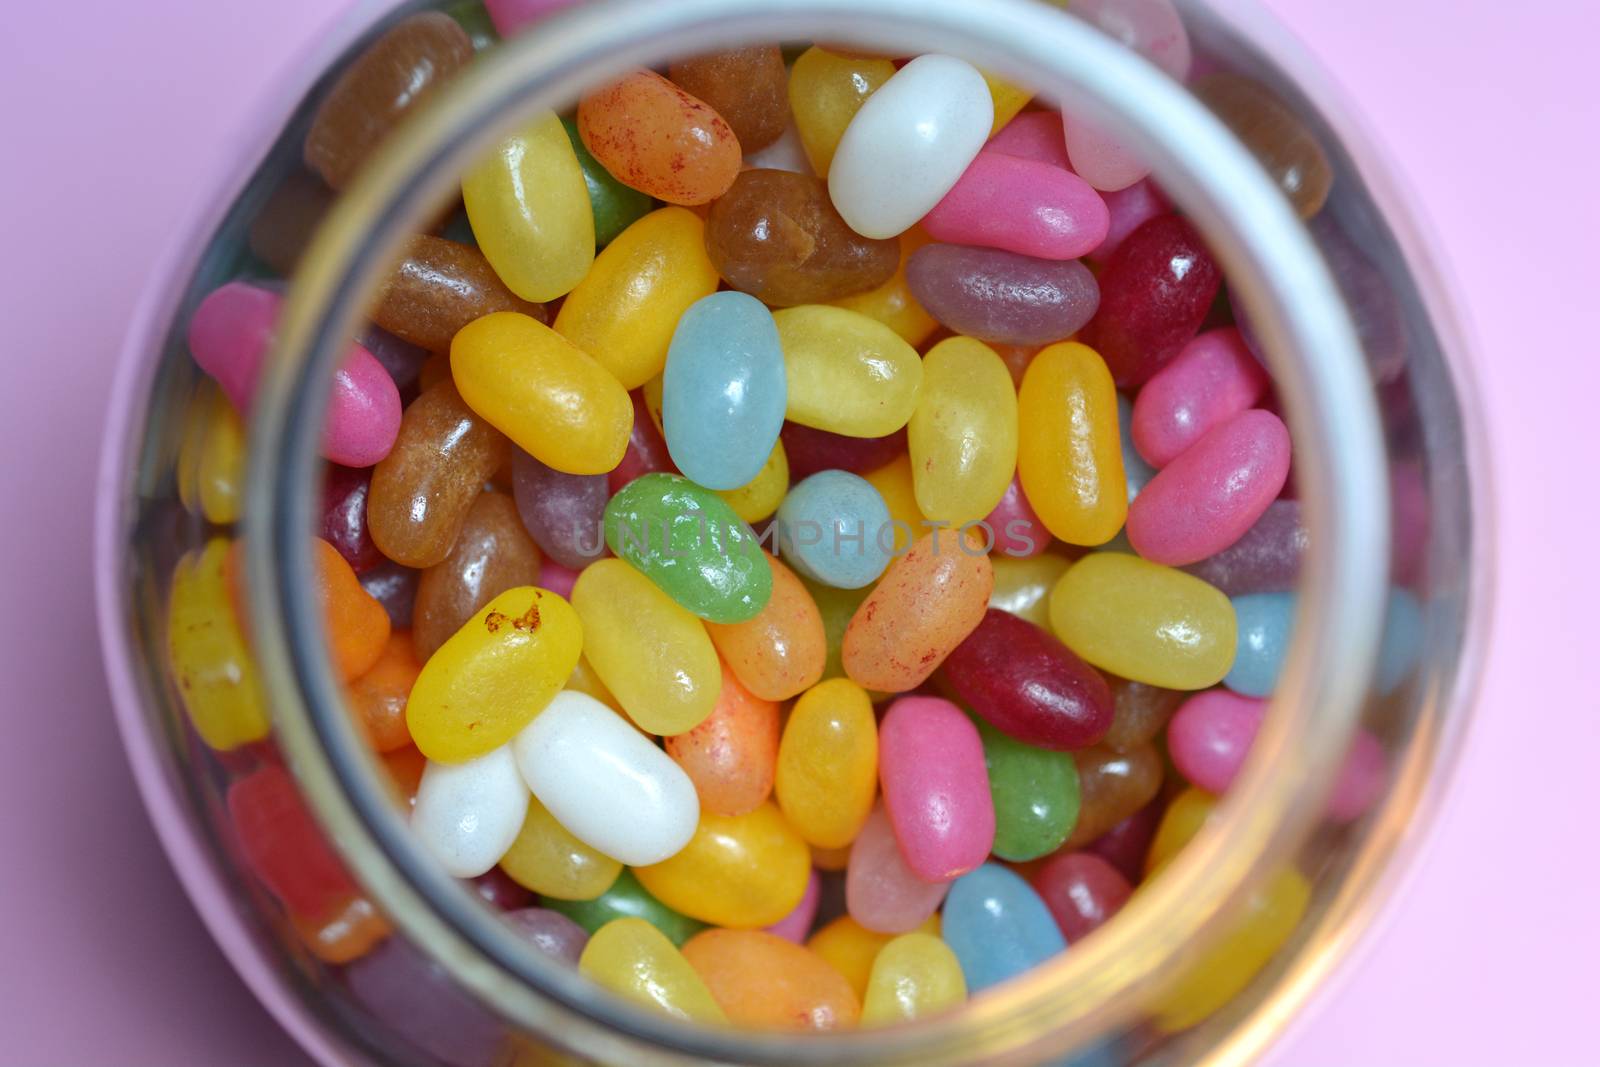 Top view of a glass jar filled with jelly beans on pink background